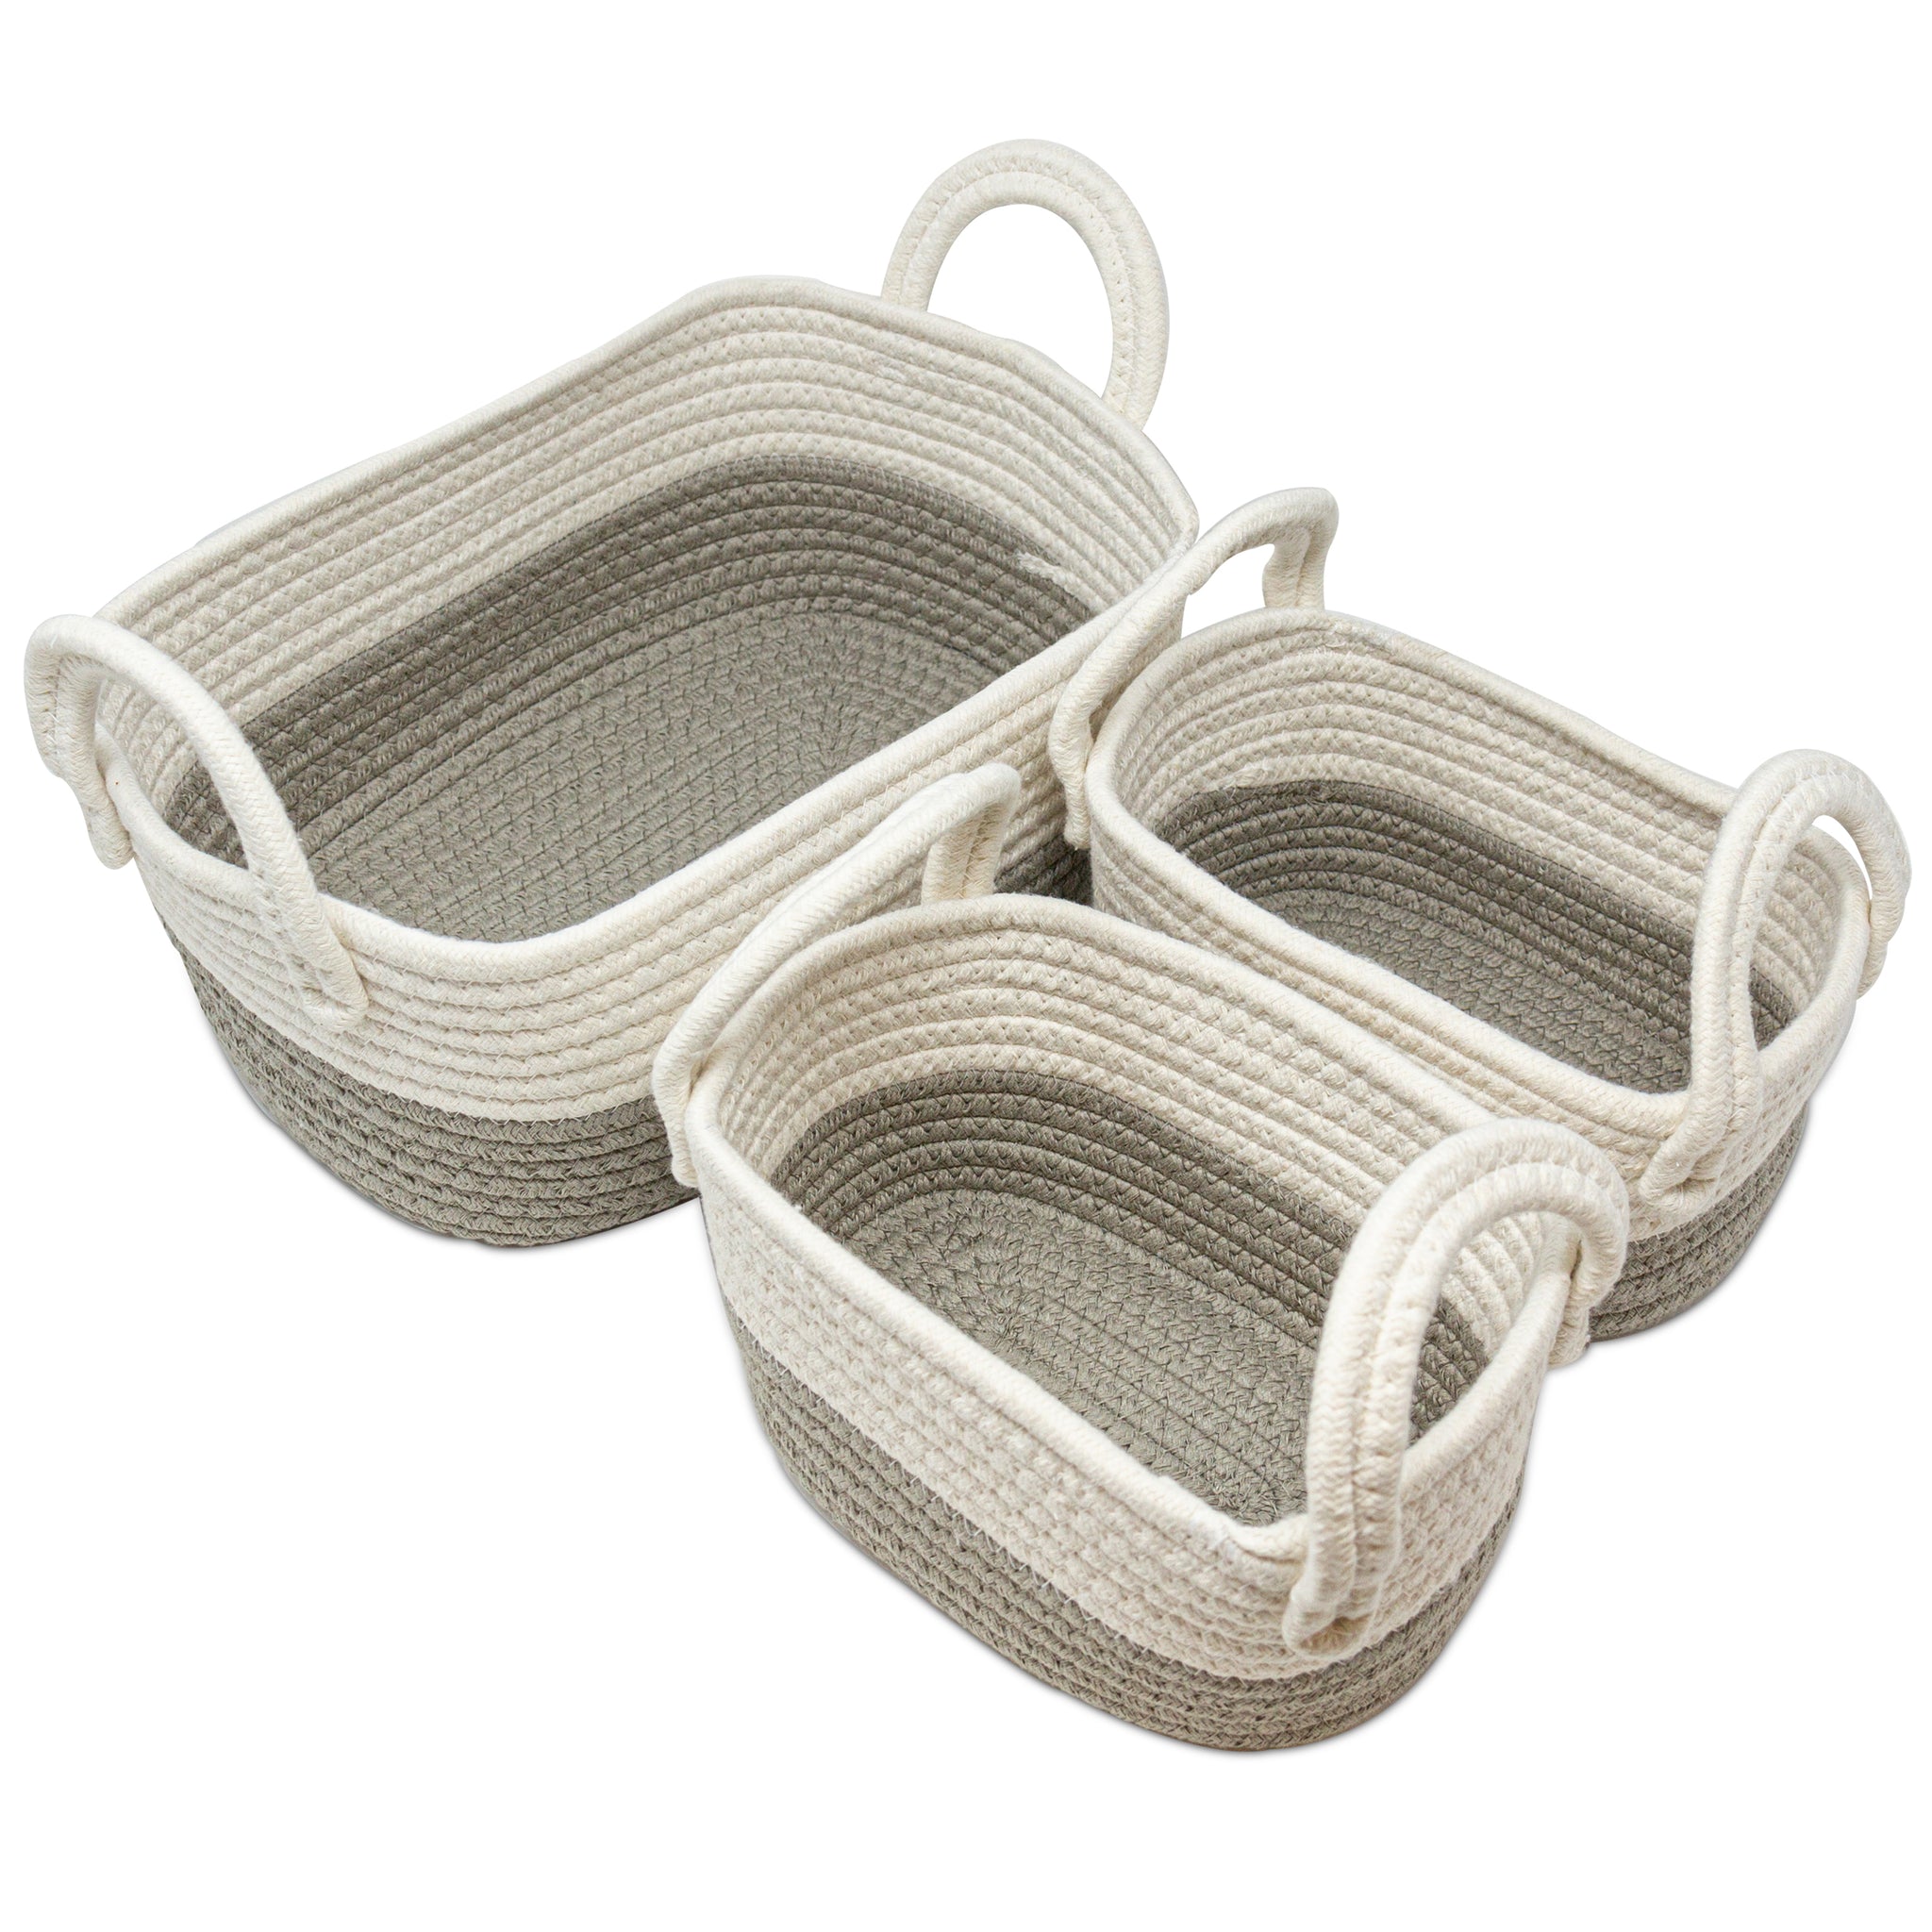 3X Rope Storage Baskets For Organizing Small Cotton Woven Decorative Basket  grey